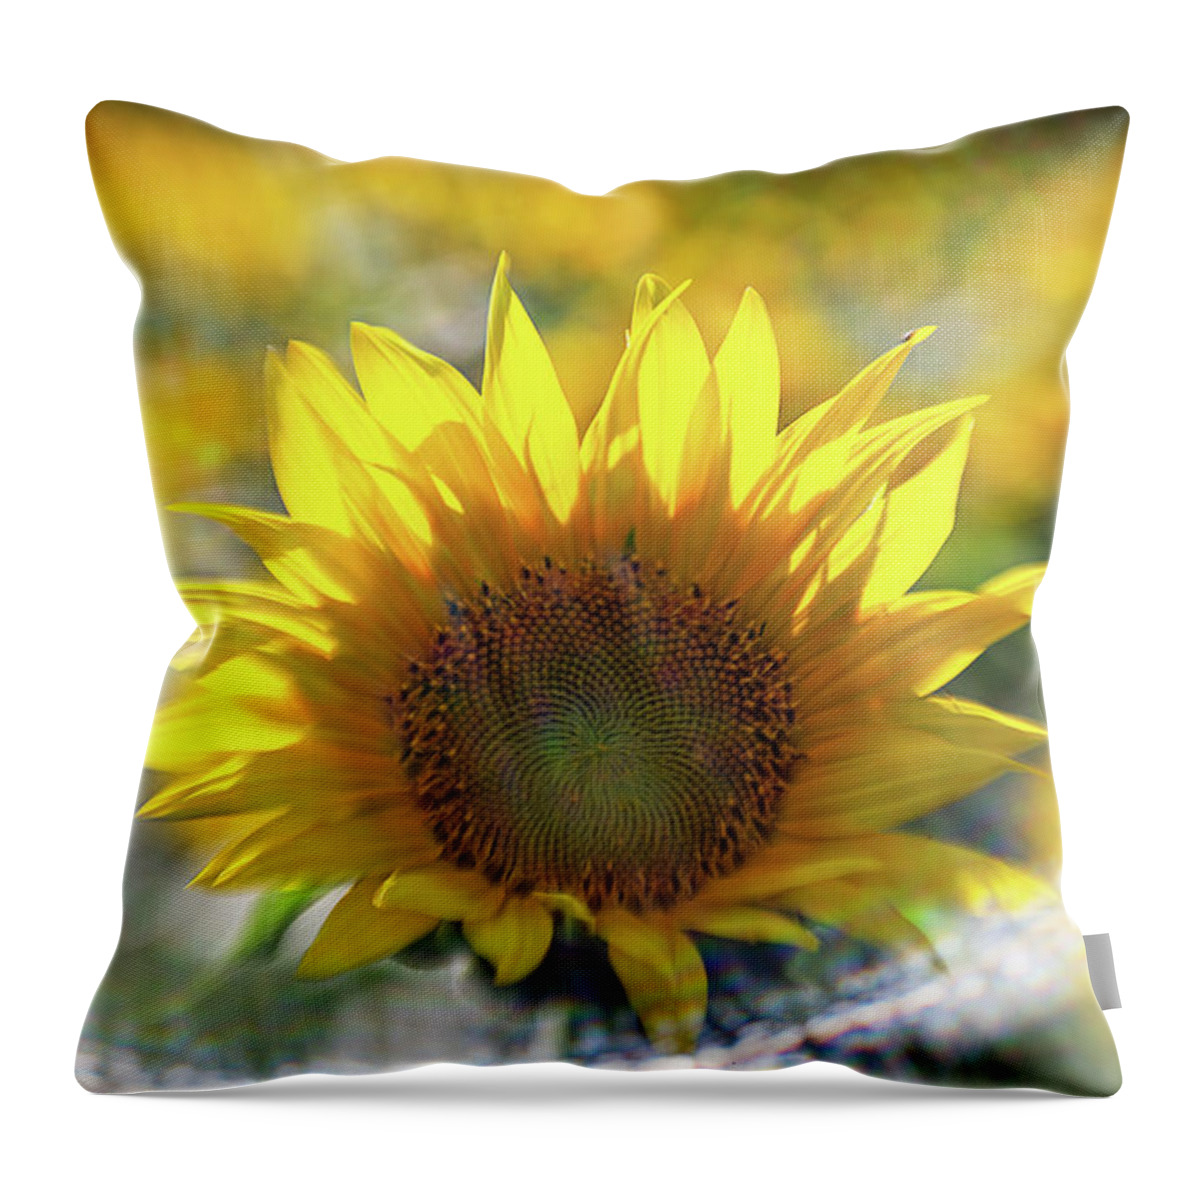 Flower Throw Pillow featuring the photograph Sunflower with Lens Flare by Natalie Rotman Cote